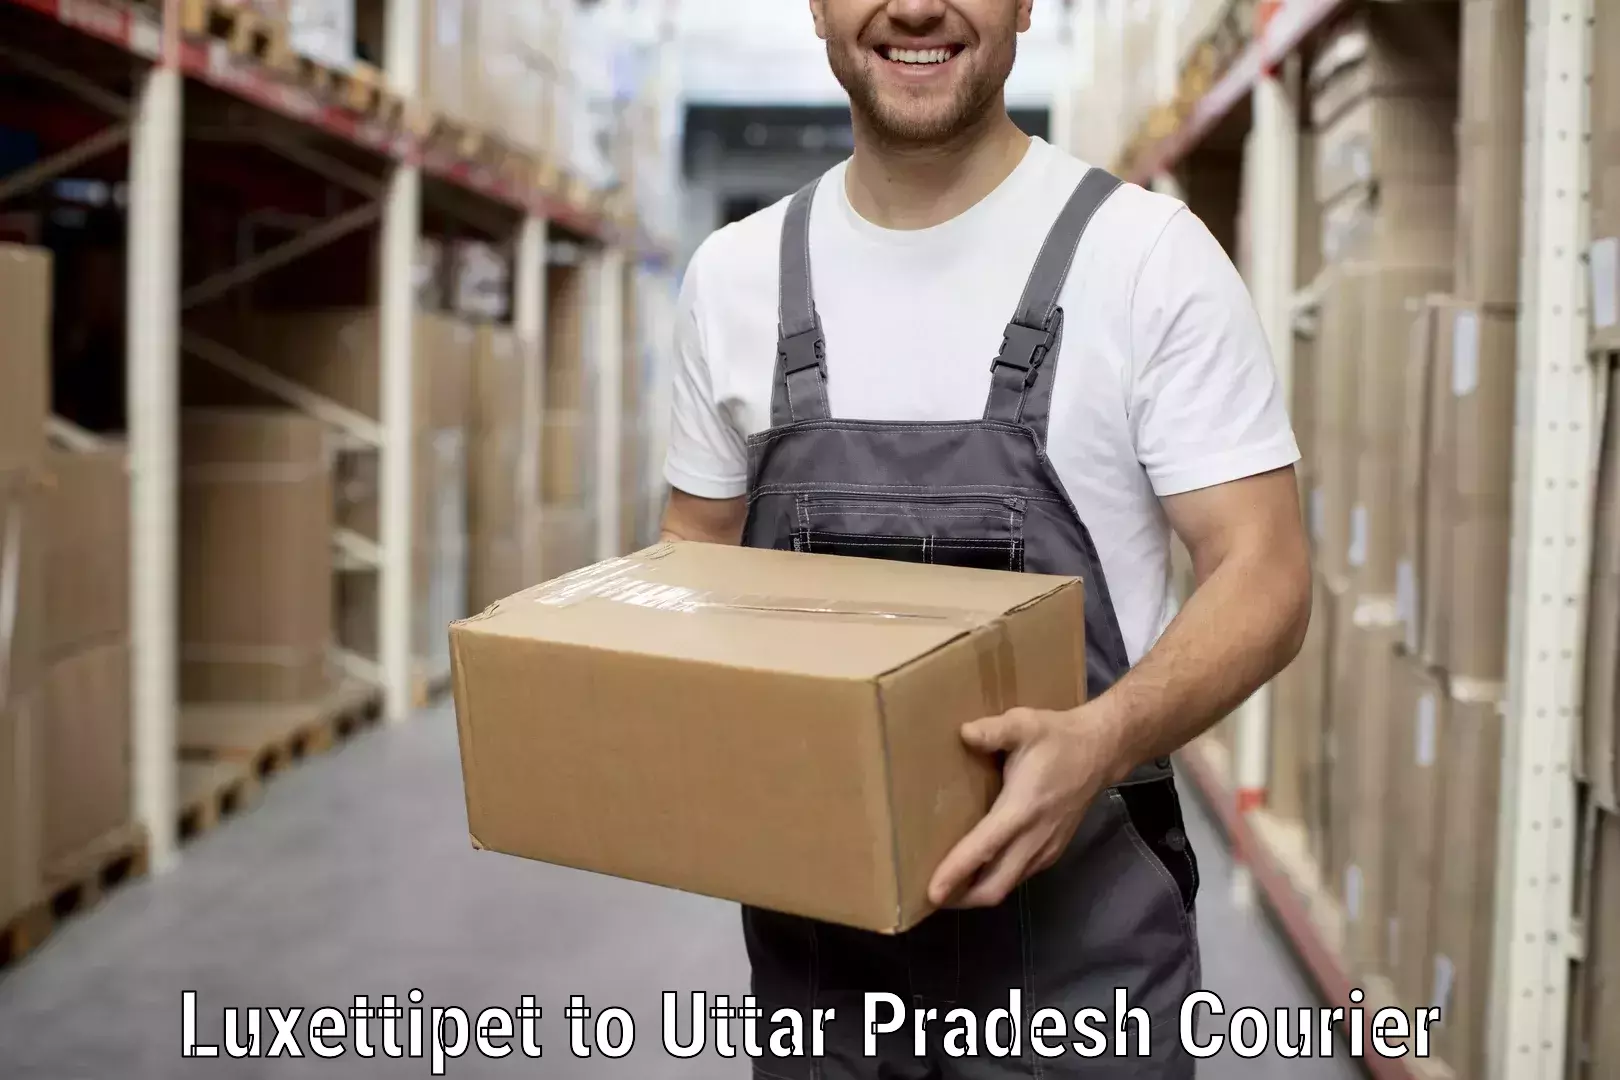 Quality moving services in Luxettipet to Khatauli